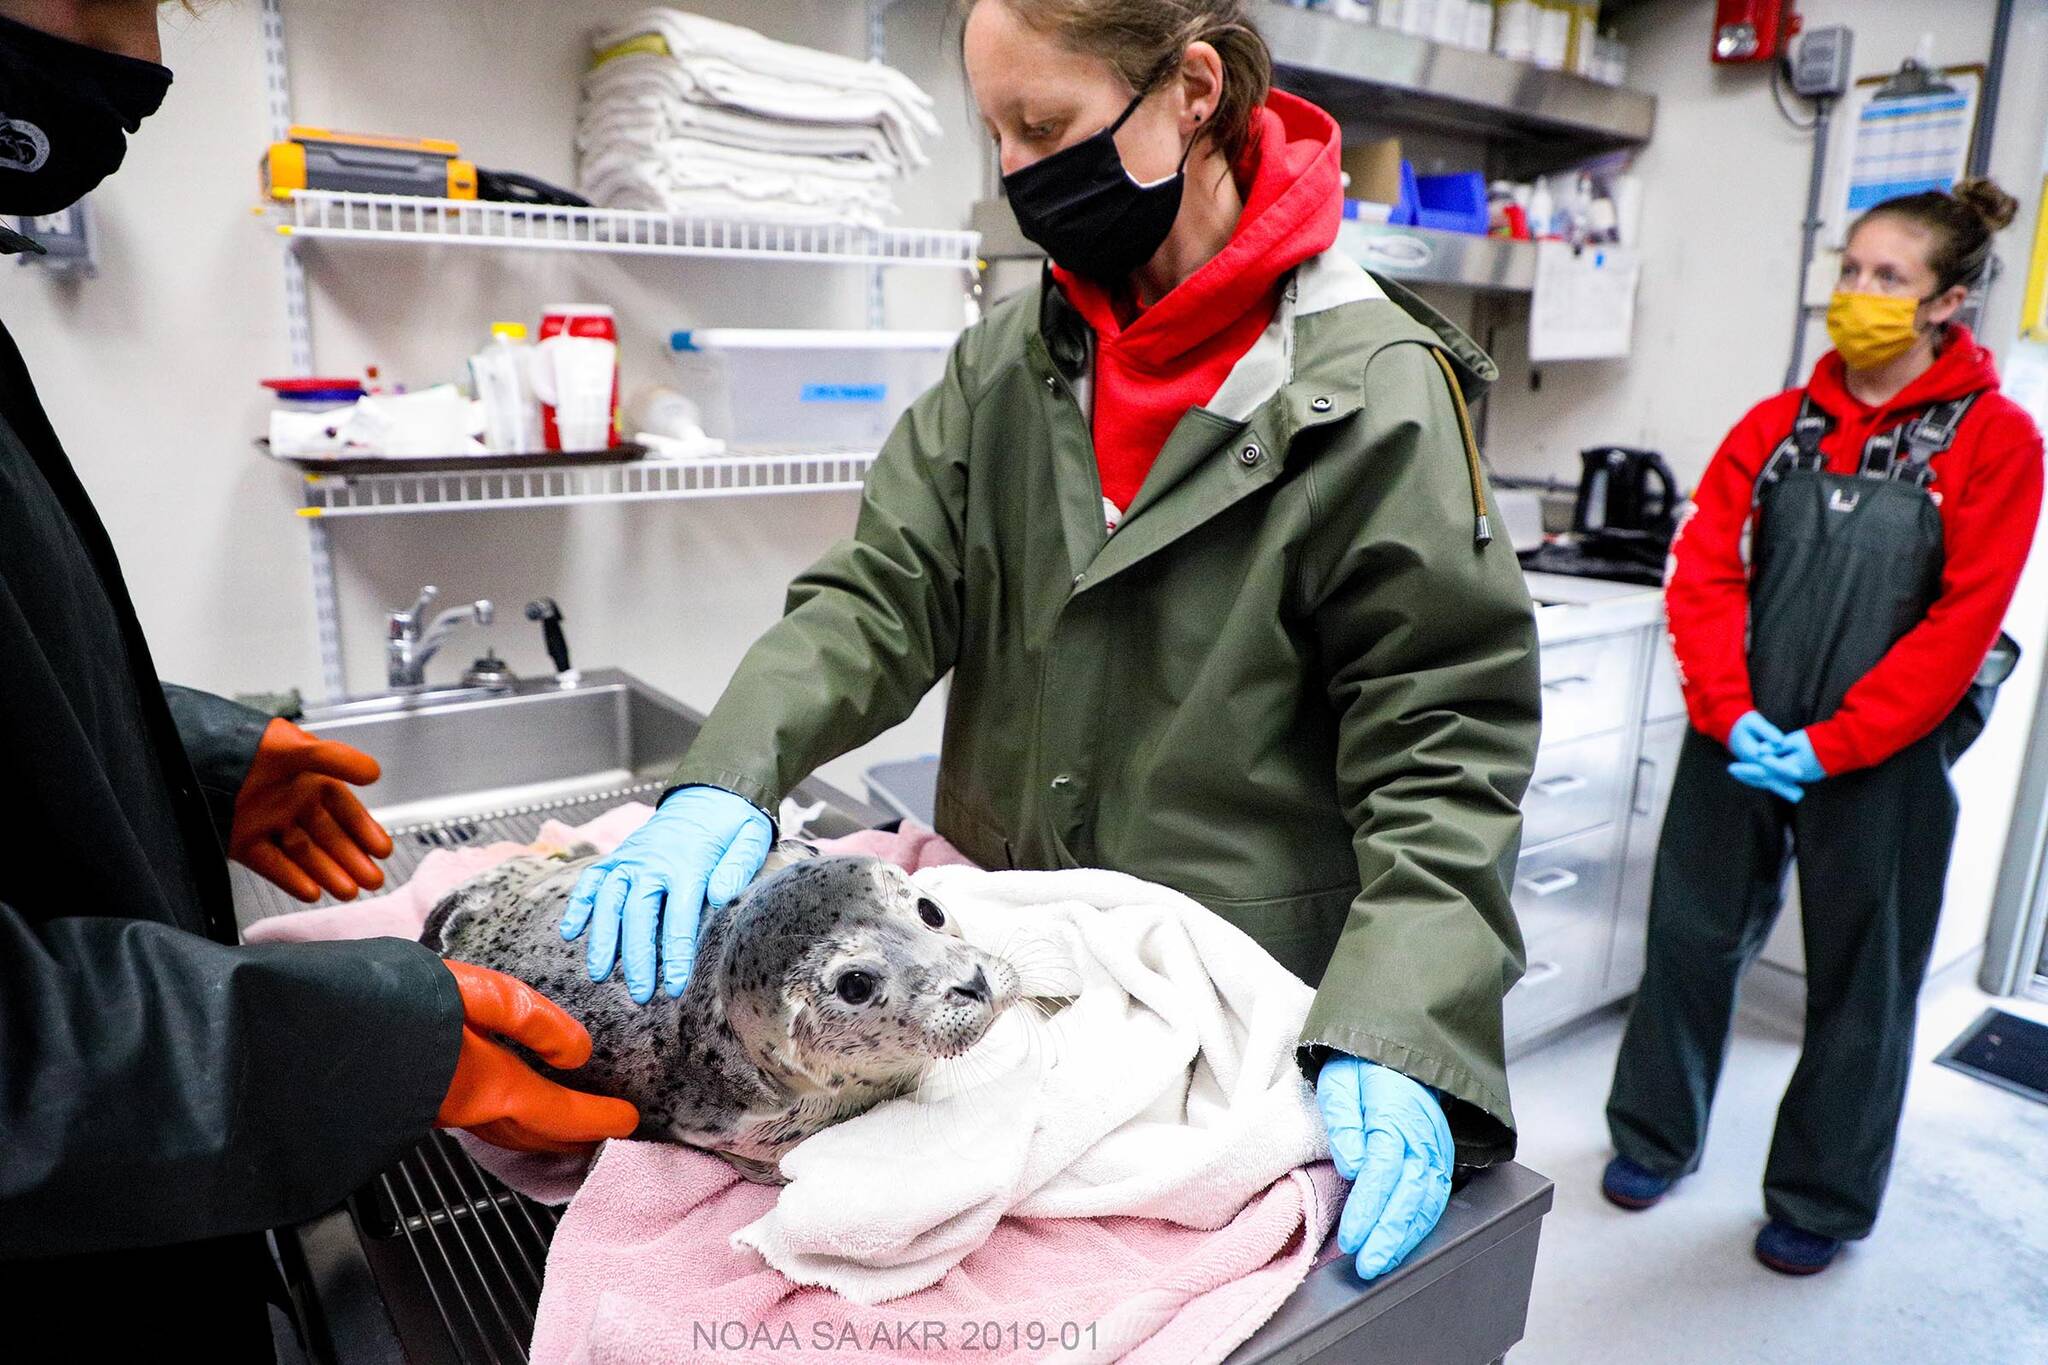 Staff members at the Alaska SeaLife Center near Seward attend to a harbor seal pup. This summer, one of the pups in the center's care came from Juneau. The seal received treatment at the center and was released into the wild in September. (Courtesy photo/Alaska SeaLife Center/Kaiti Chritz)